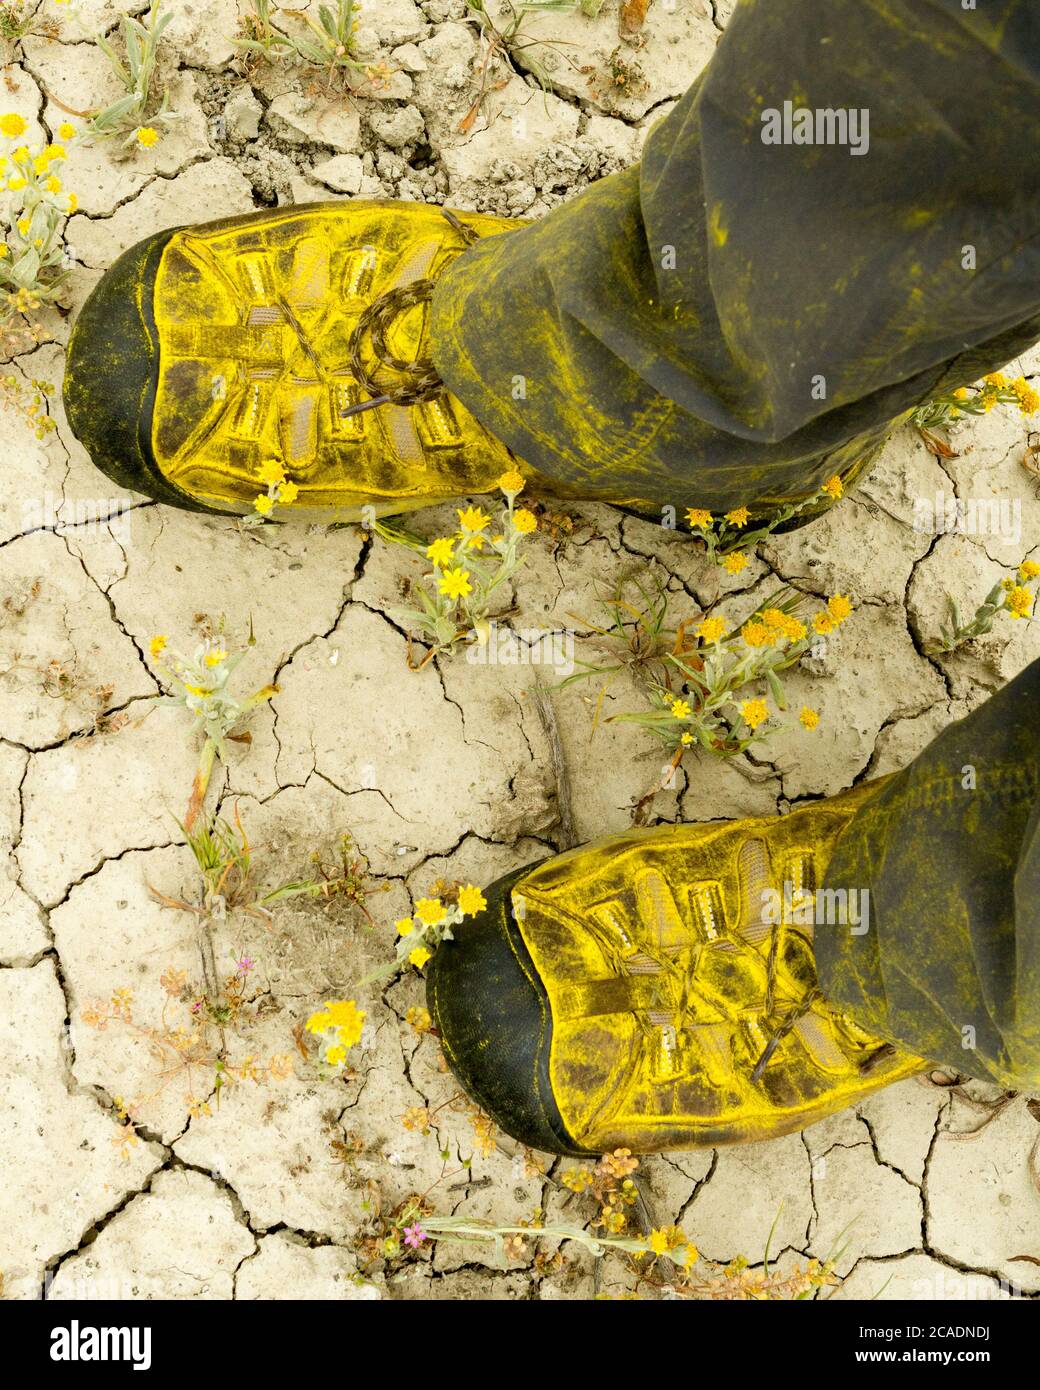 SuperBloom Boots - Pollen replaces dust while hiking among the 2017 SuperBloom. Carrizo Plain National Monument, California, USA Stock Photo